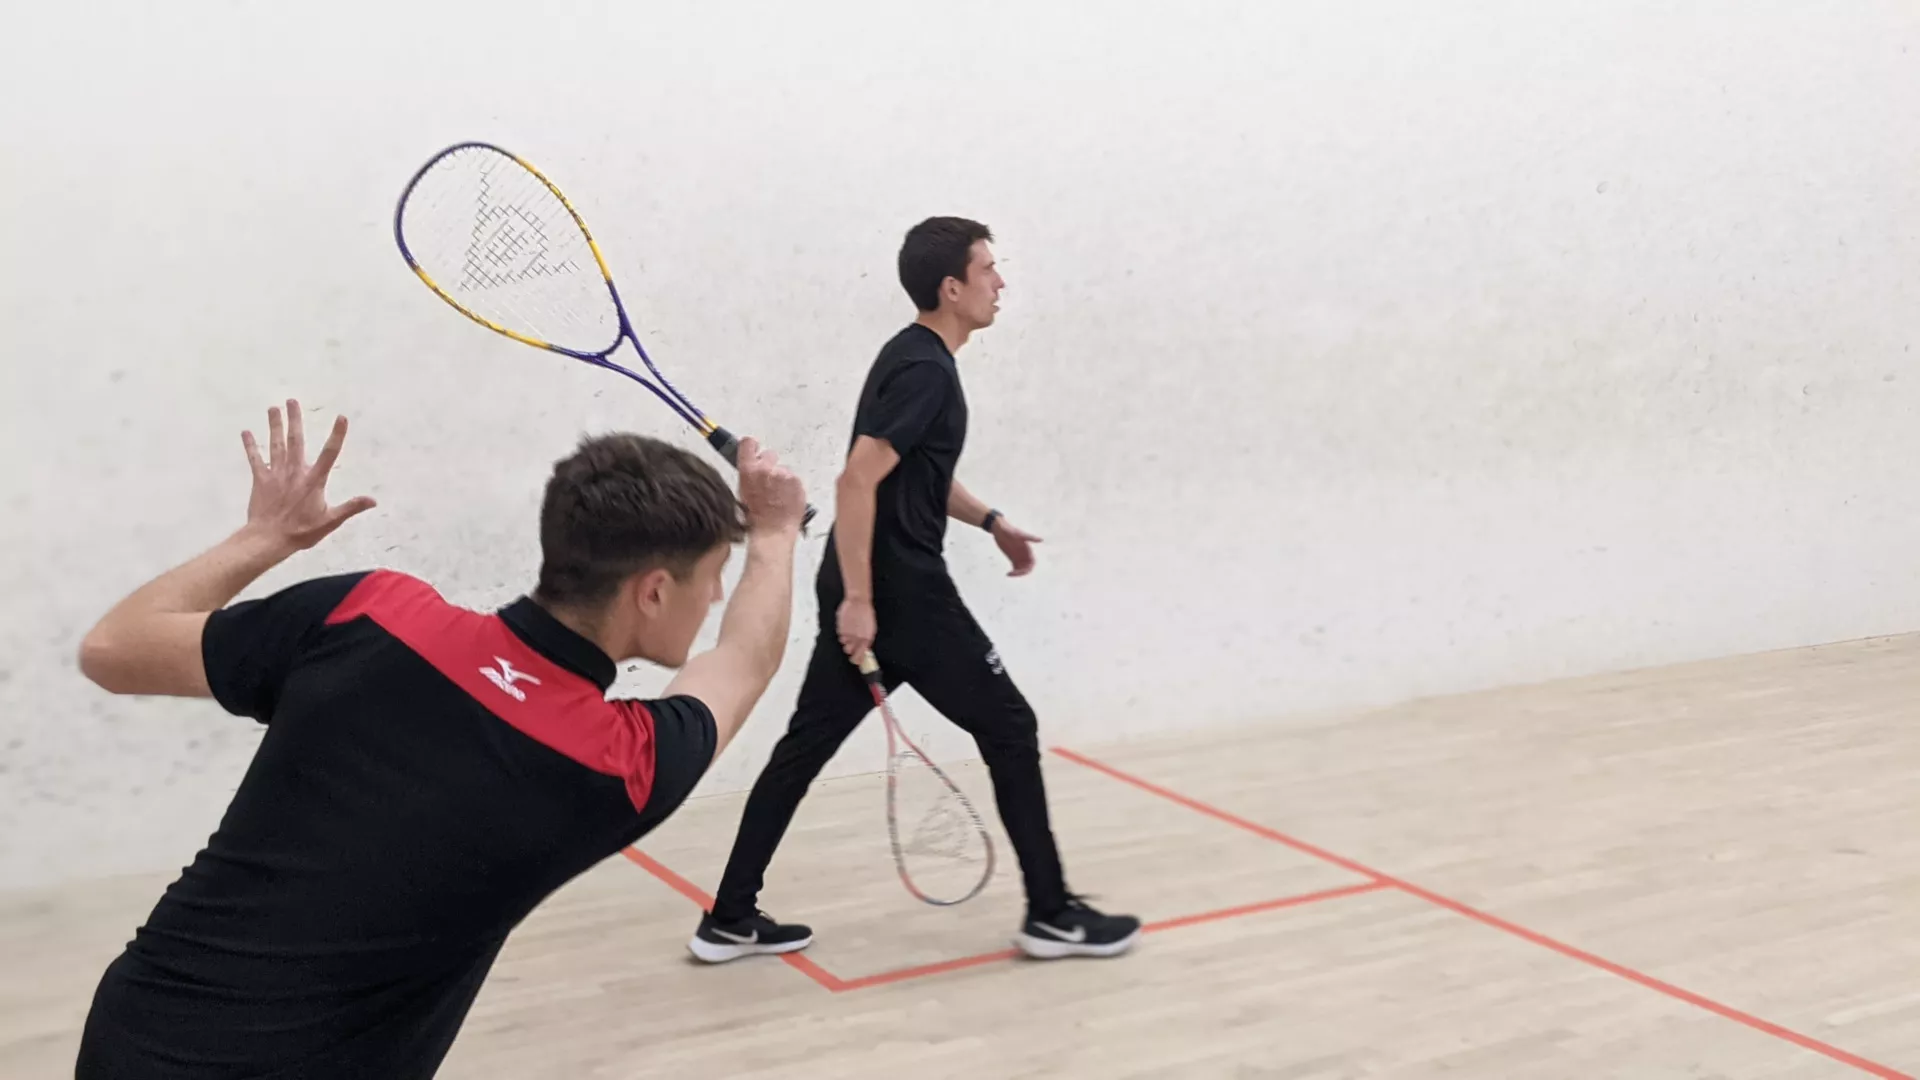 Cube Squash & Fitness in Poland, Europe | Squash - Rated 8.5